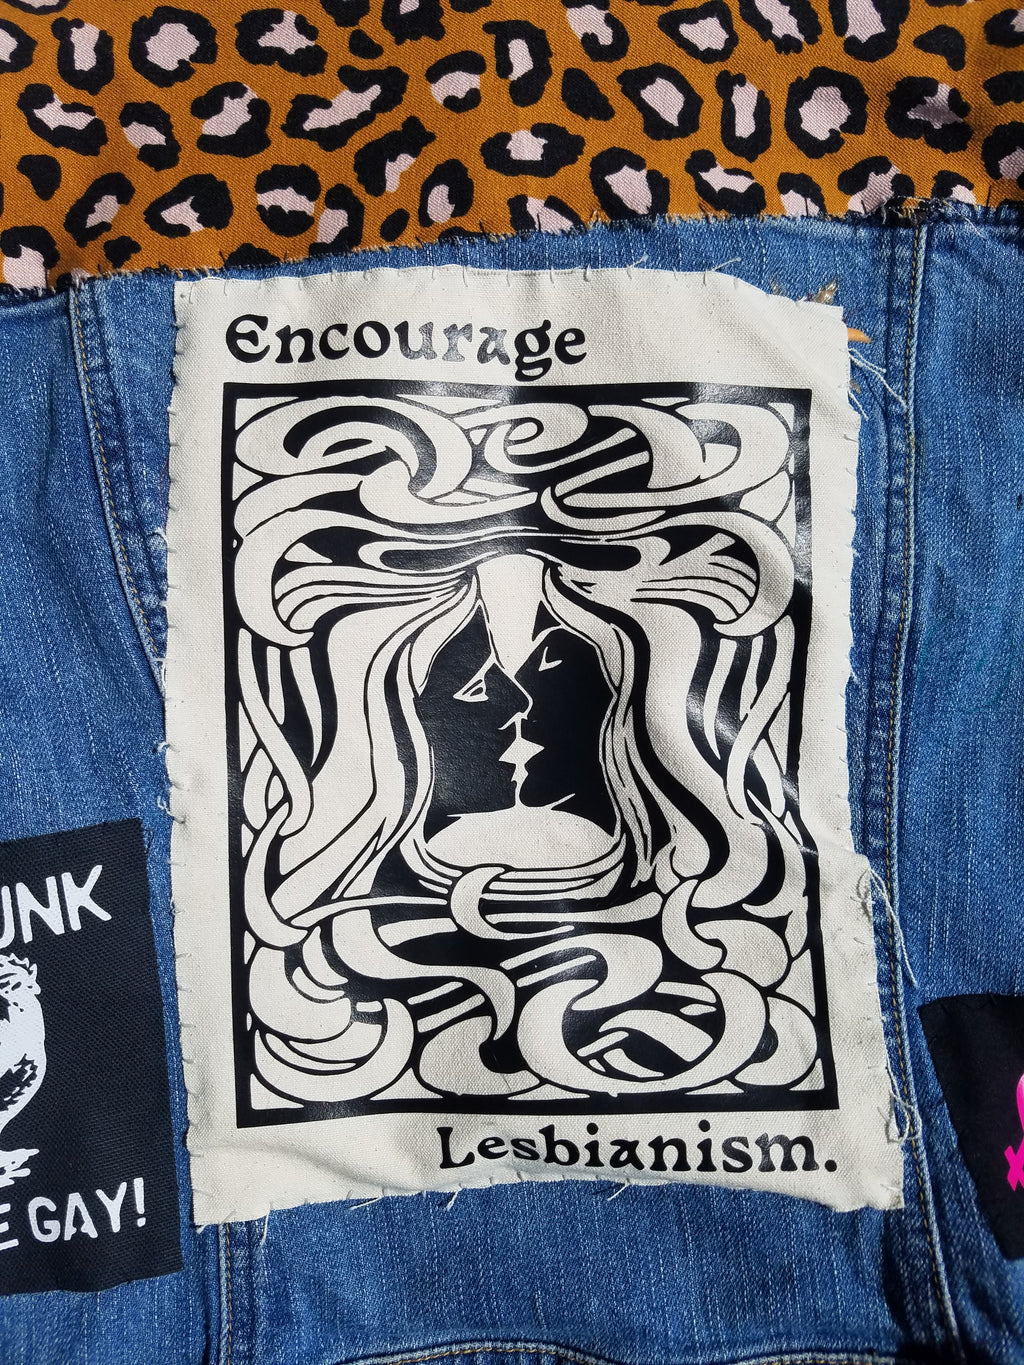 Folk Punk Made Me Gay! sew-on patch – Toxic Femme